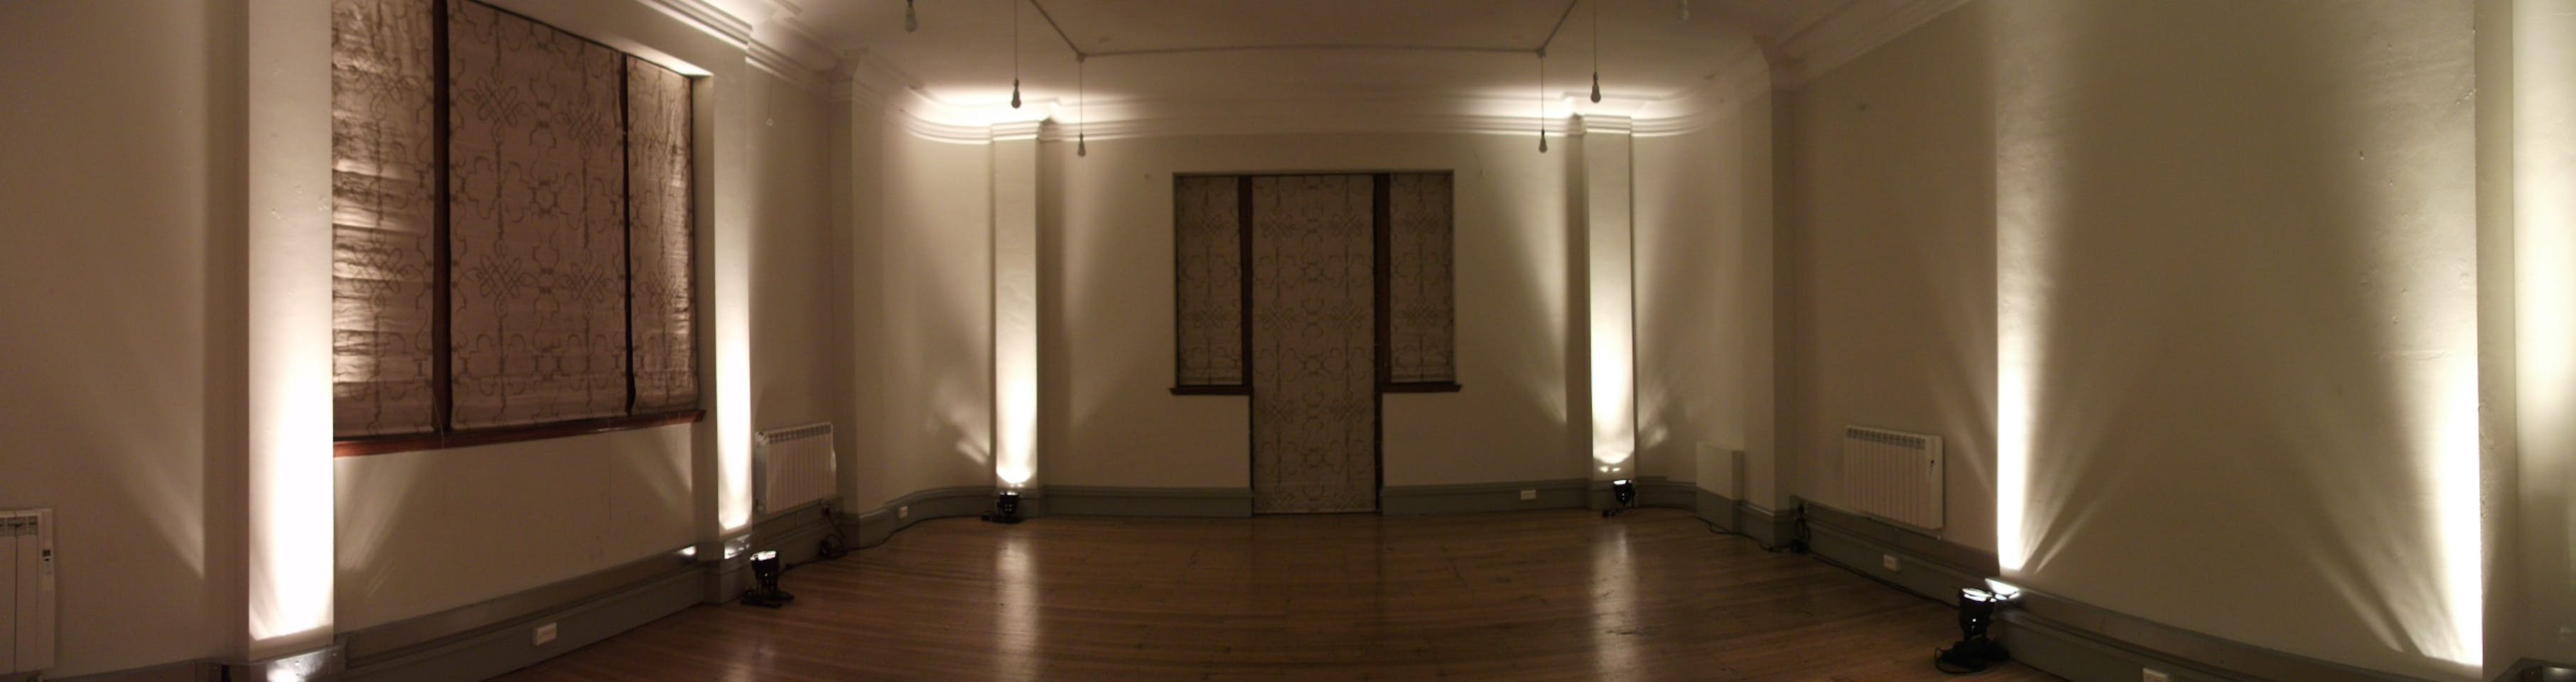 Music Practice Rooms - Banner